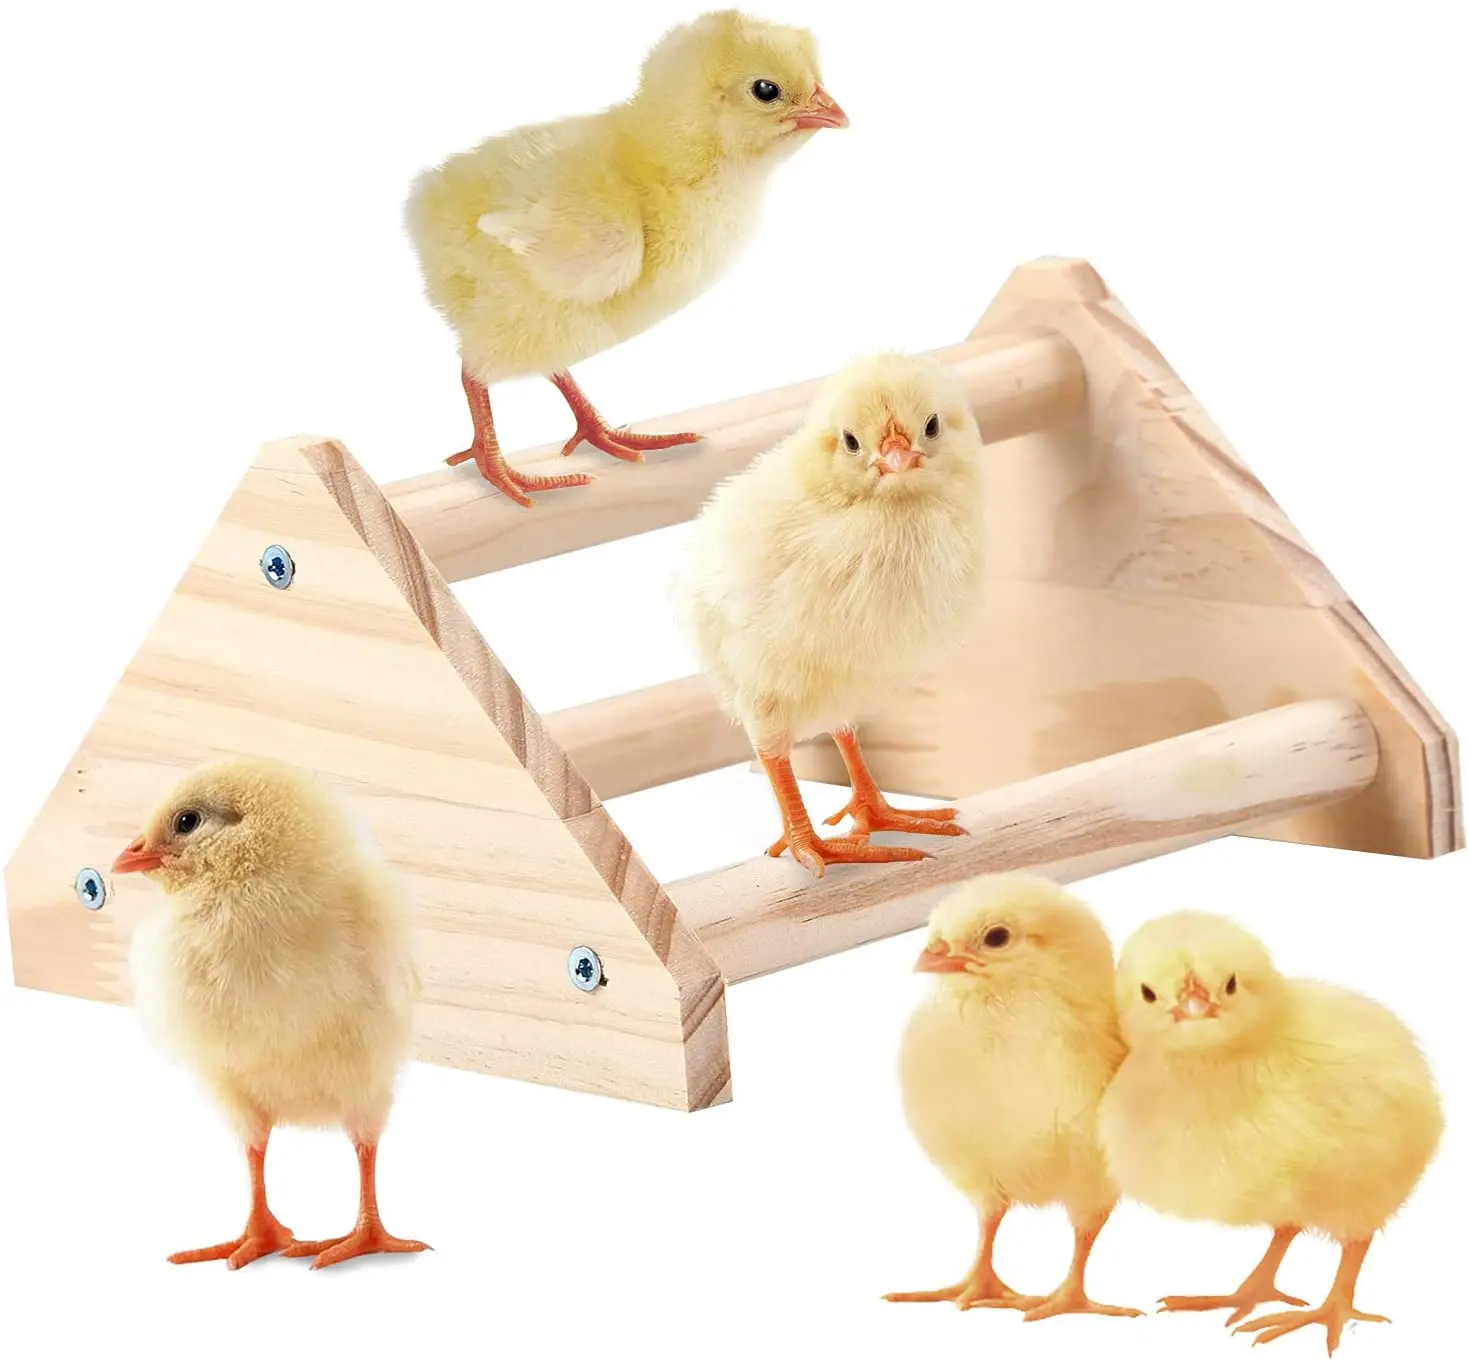 COMOPEZ Chicken Perch for Chicks Strong Wooden Jungle Gym Roosting Bar with Holes Chicken Swing Chick Coop Toy for Large Bird Baby Chicks Birds Parrot Standing Training 